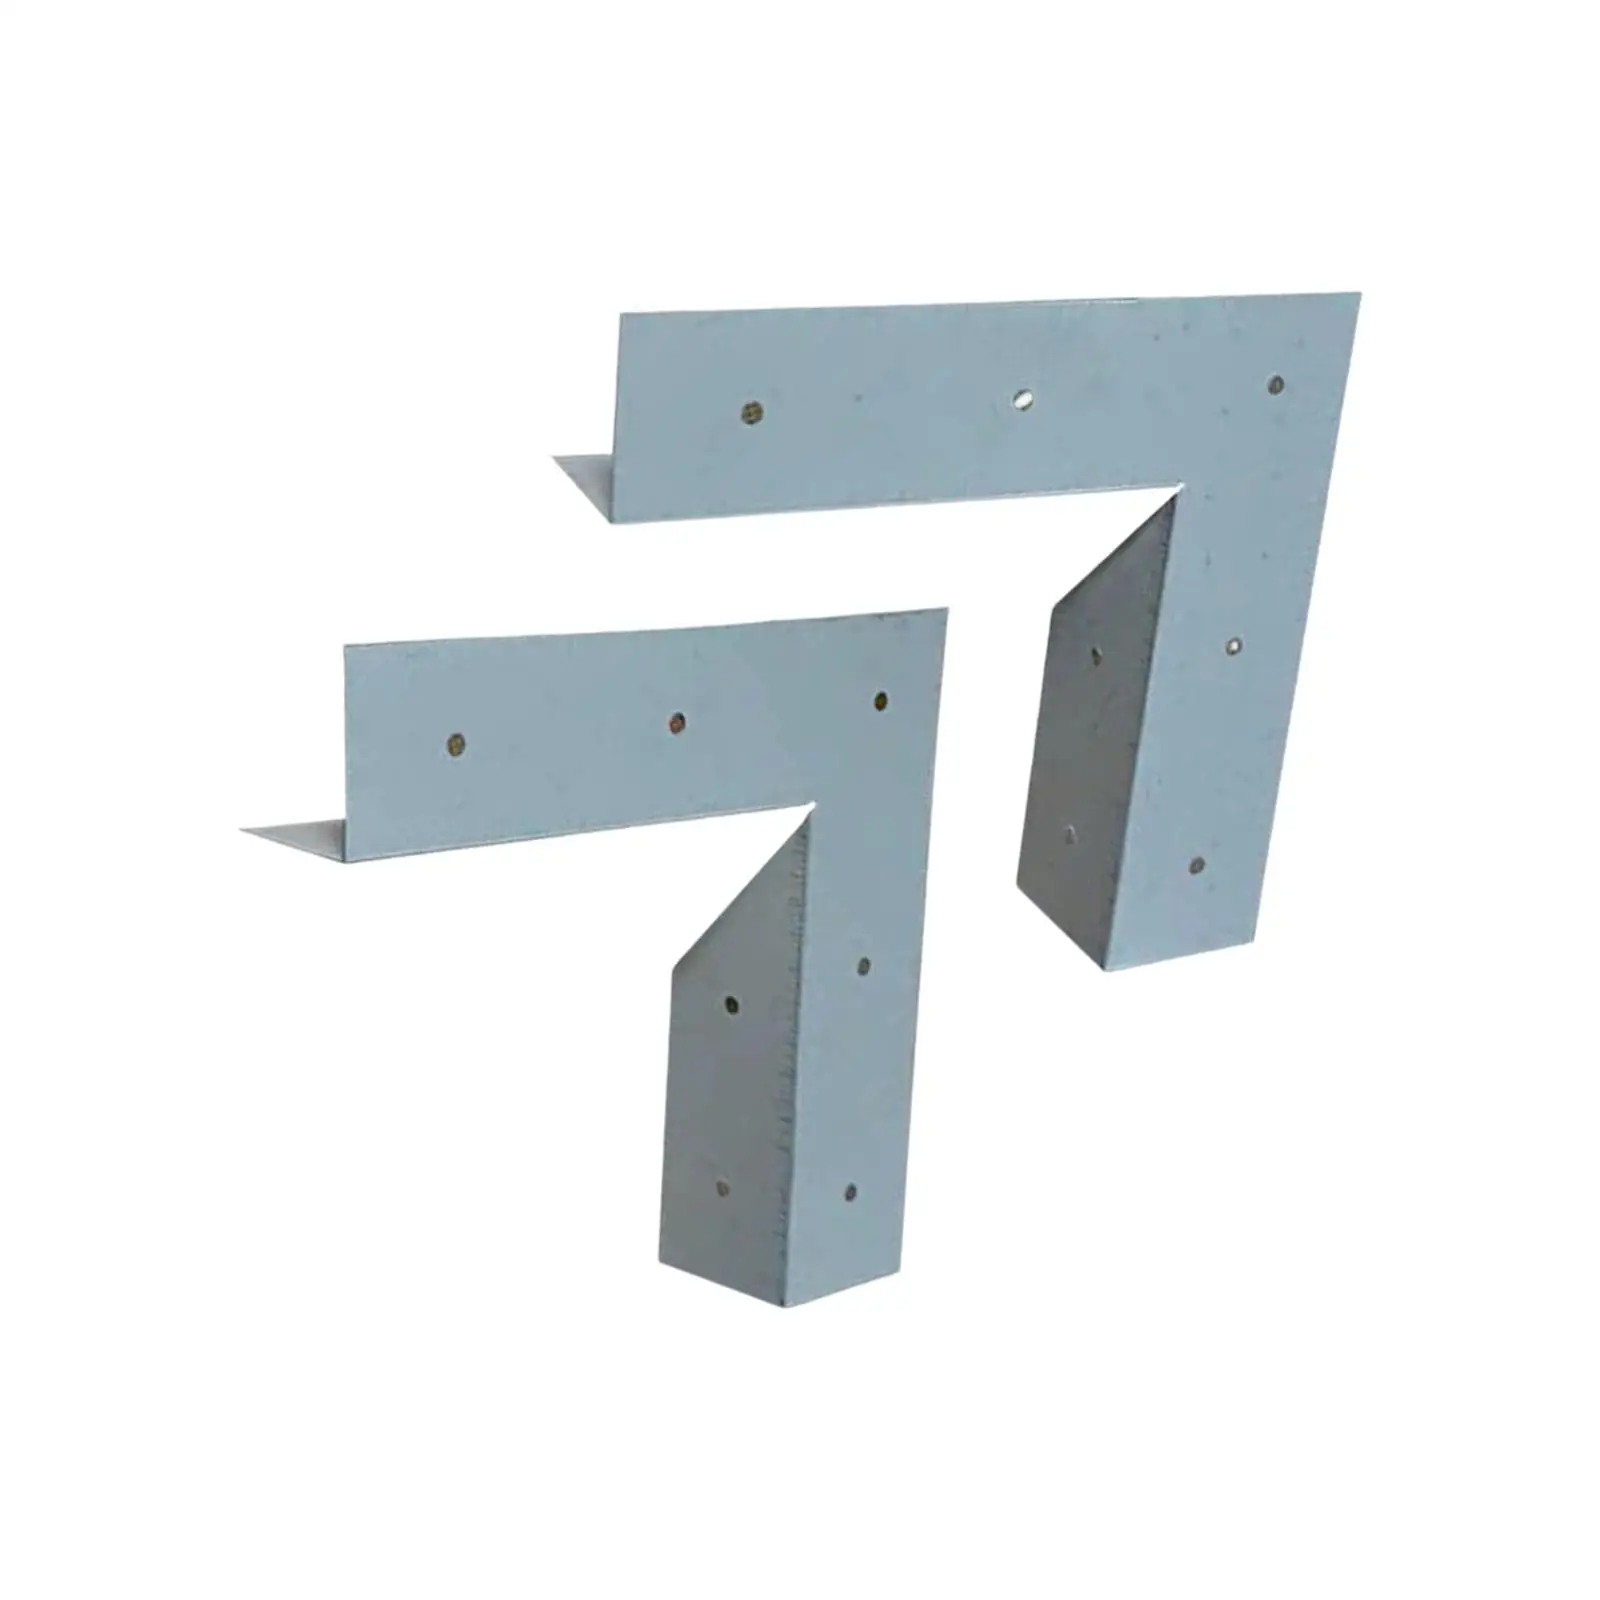 2Pcs Heavy Duty Corner Reinforcement Brackets Replaces Furniture Repair Angles Fixing hardware for Cupboard Suspended Ceilings